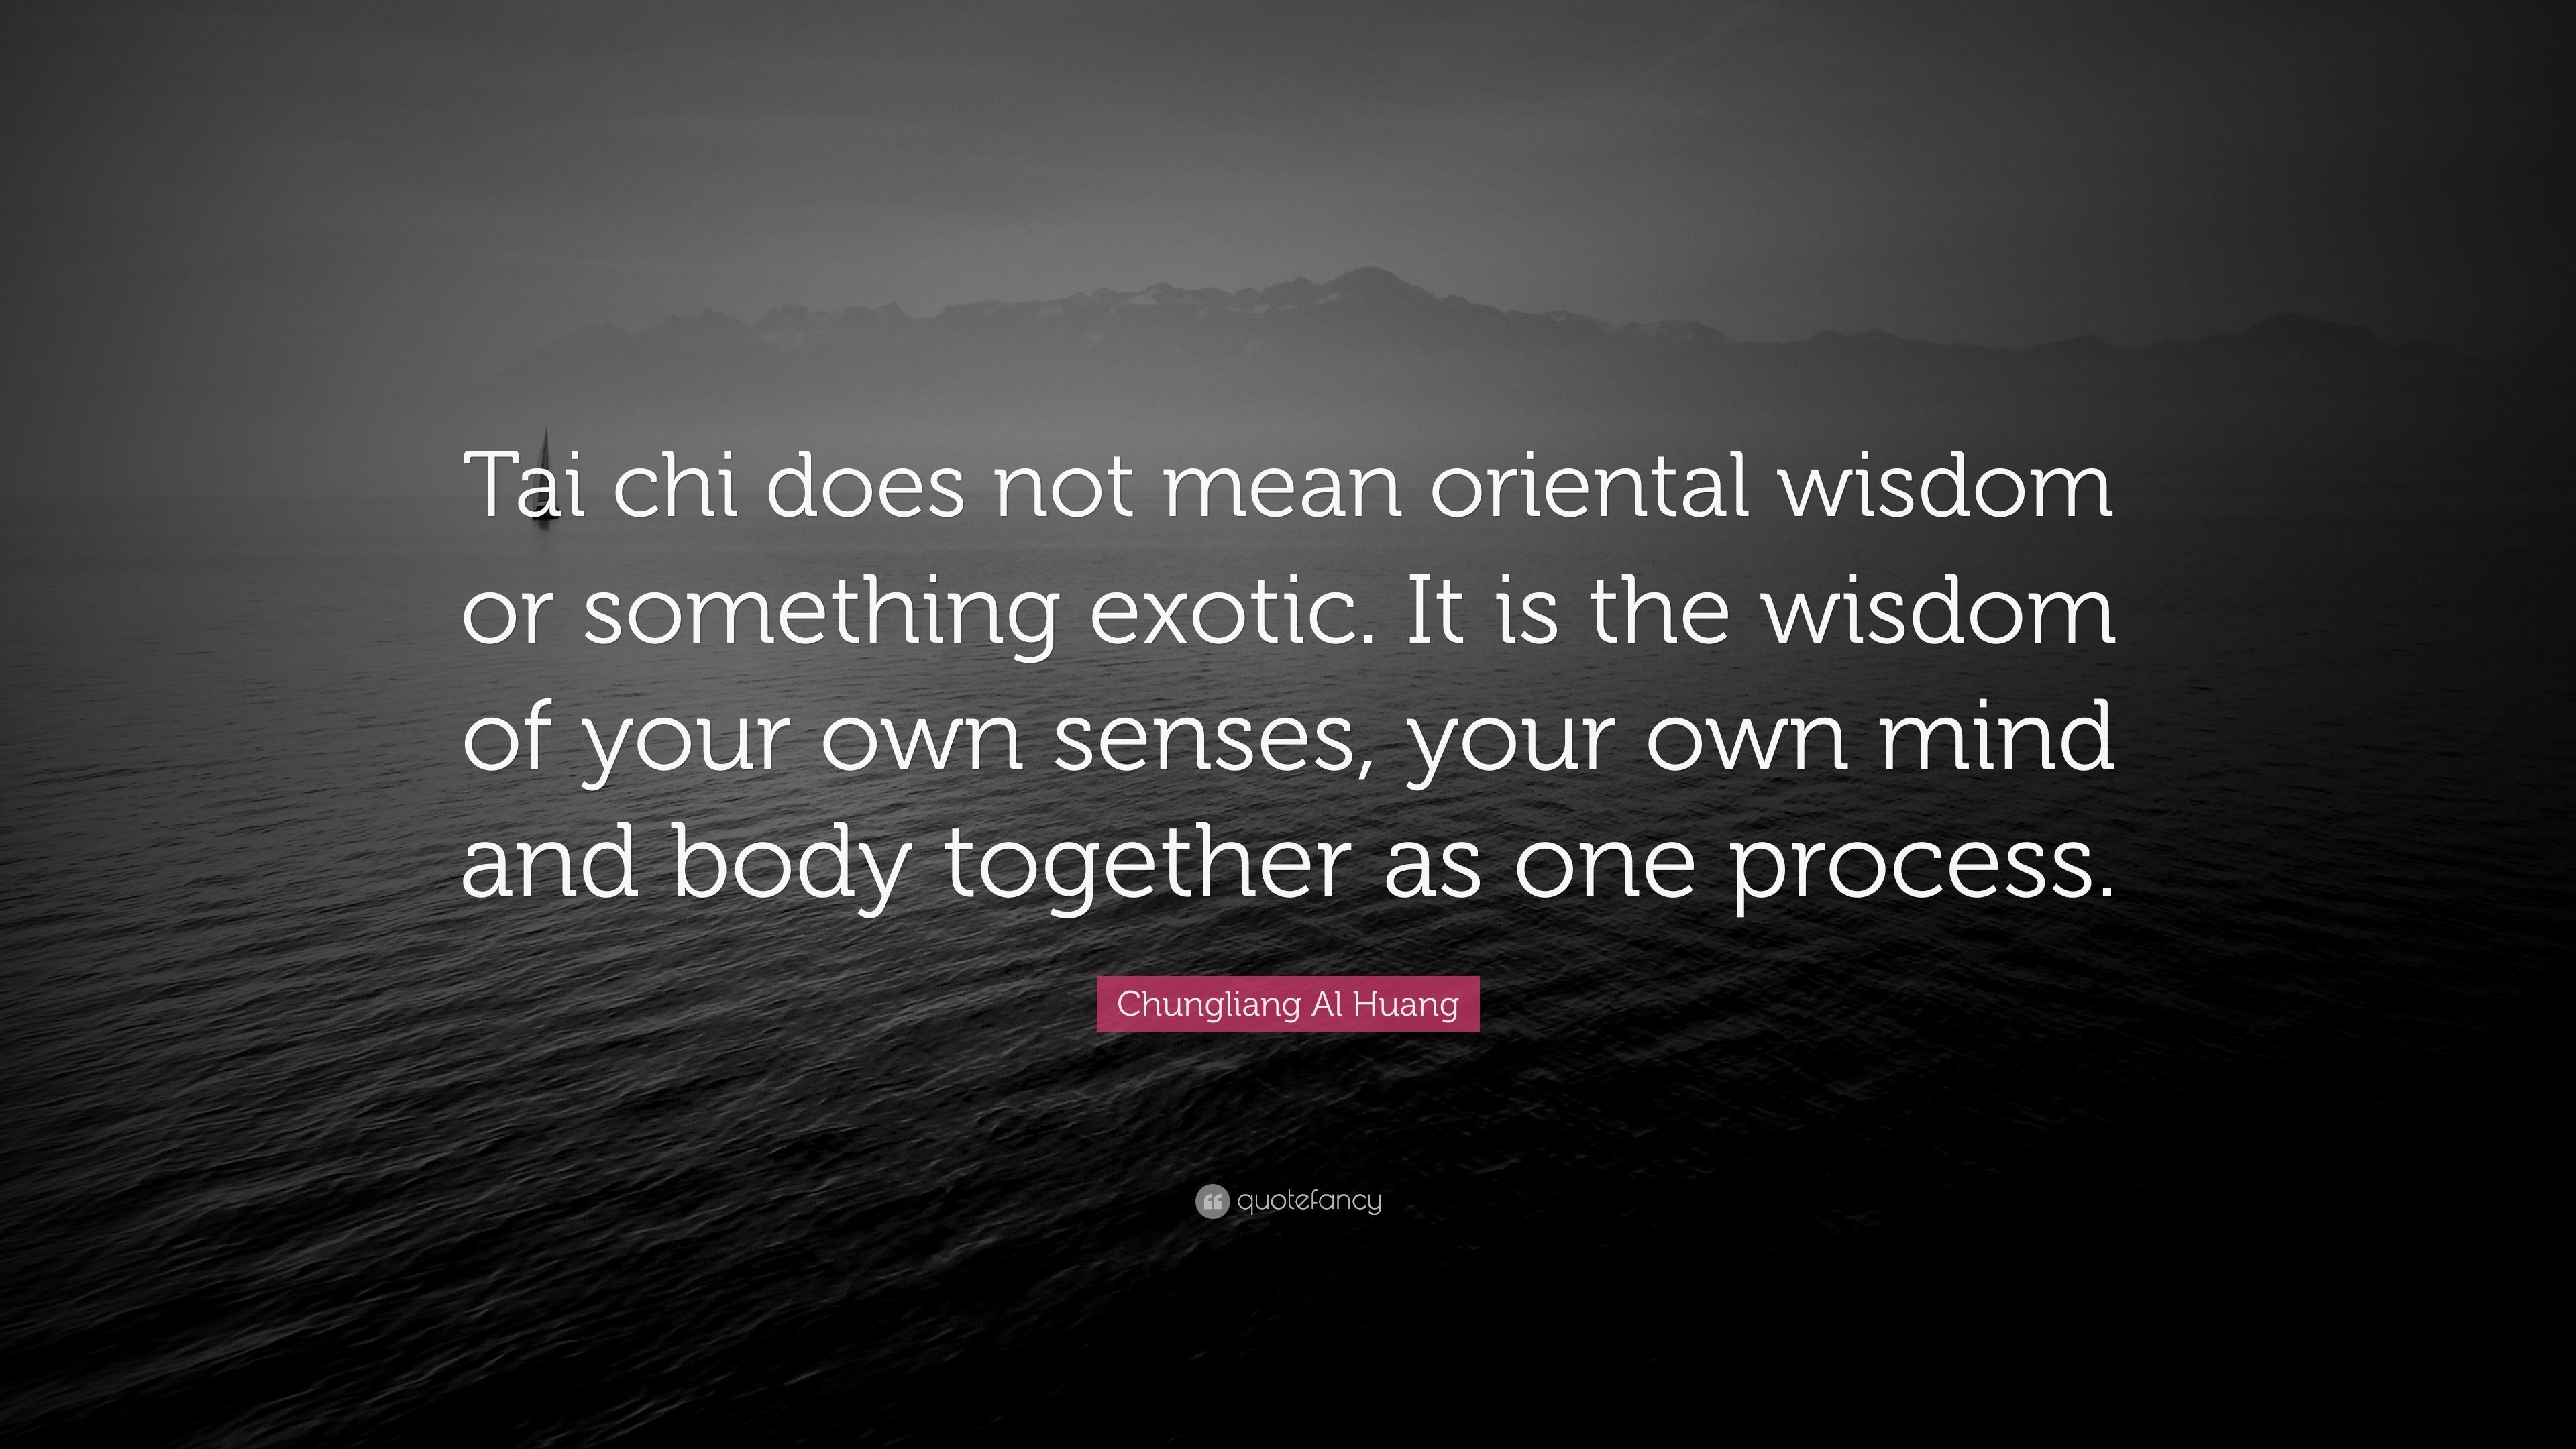 3840x2160 Chungliang Al Huang Quote: “Tai chi does not mean oriental wisdom or  something exotic